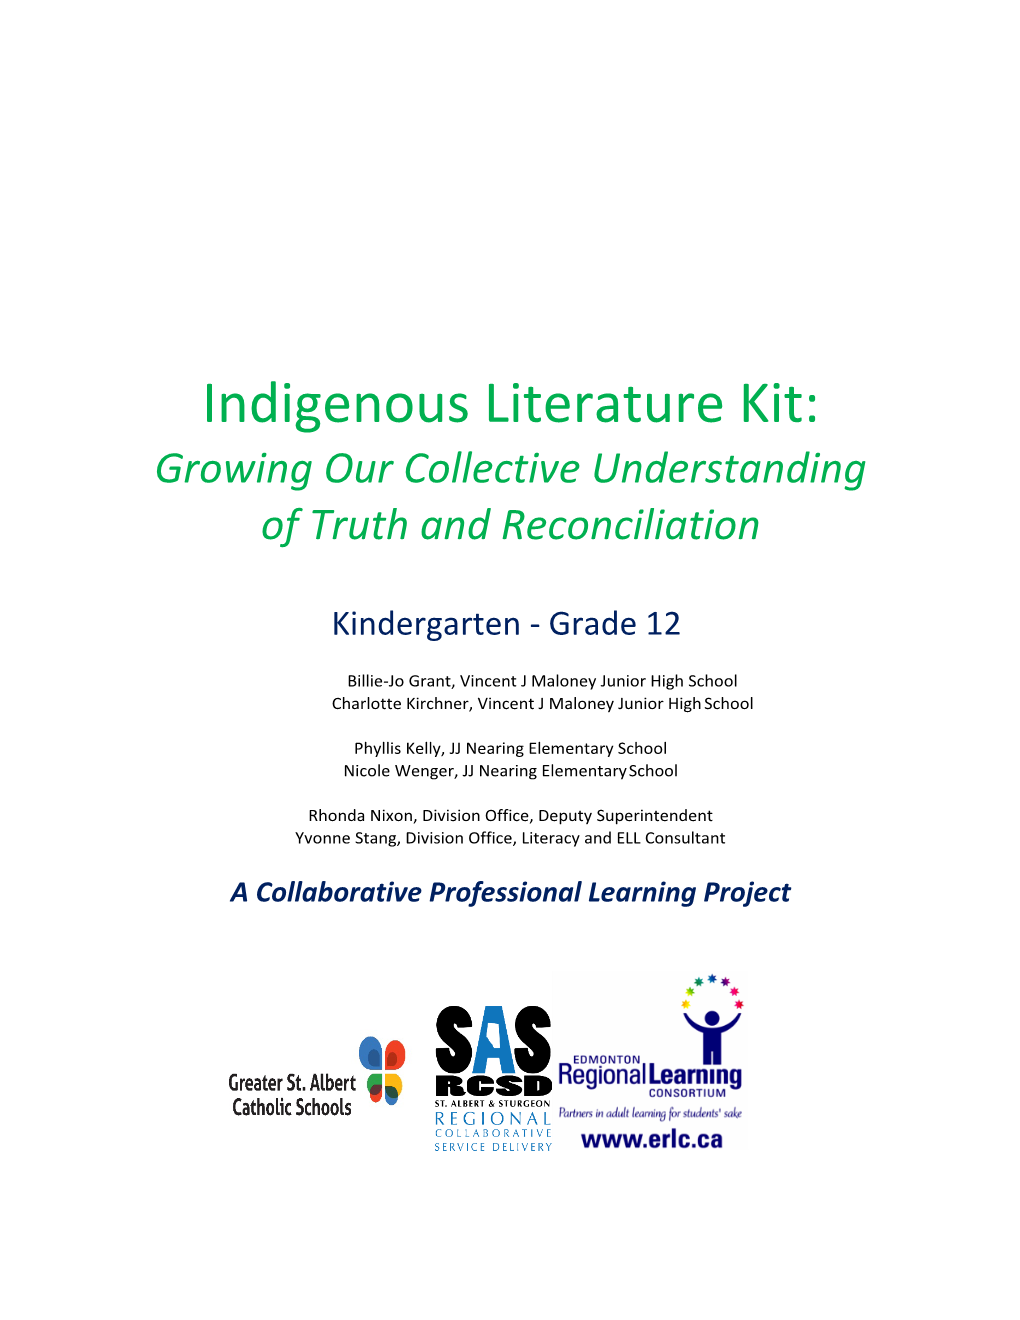 Indigenous Literature Kit: Growing Our Collective Understanding of Truth and Reconciliation